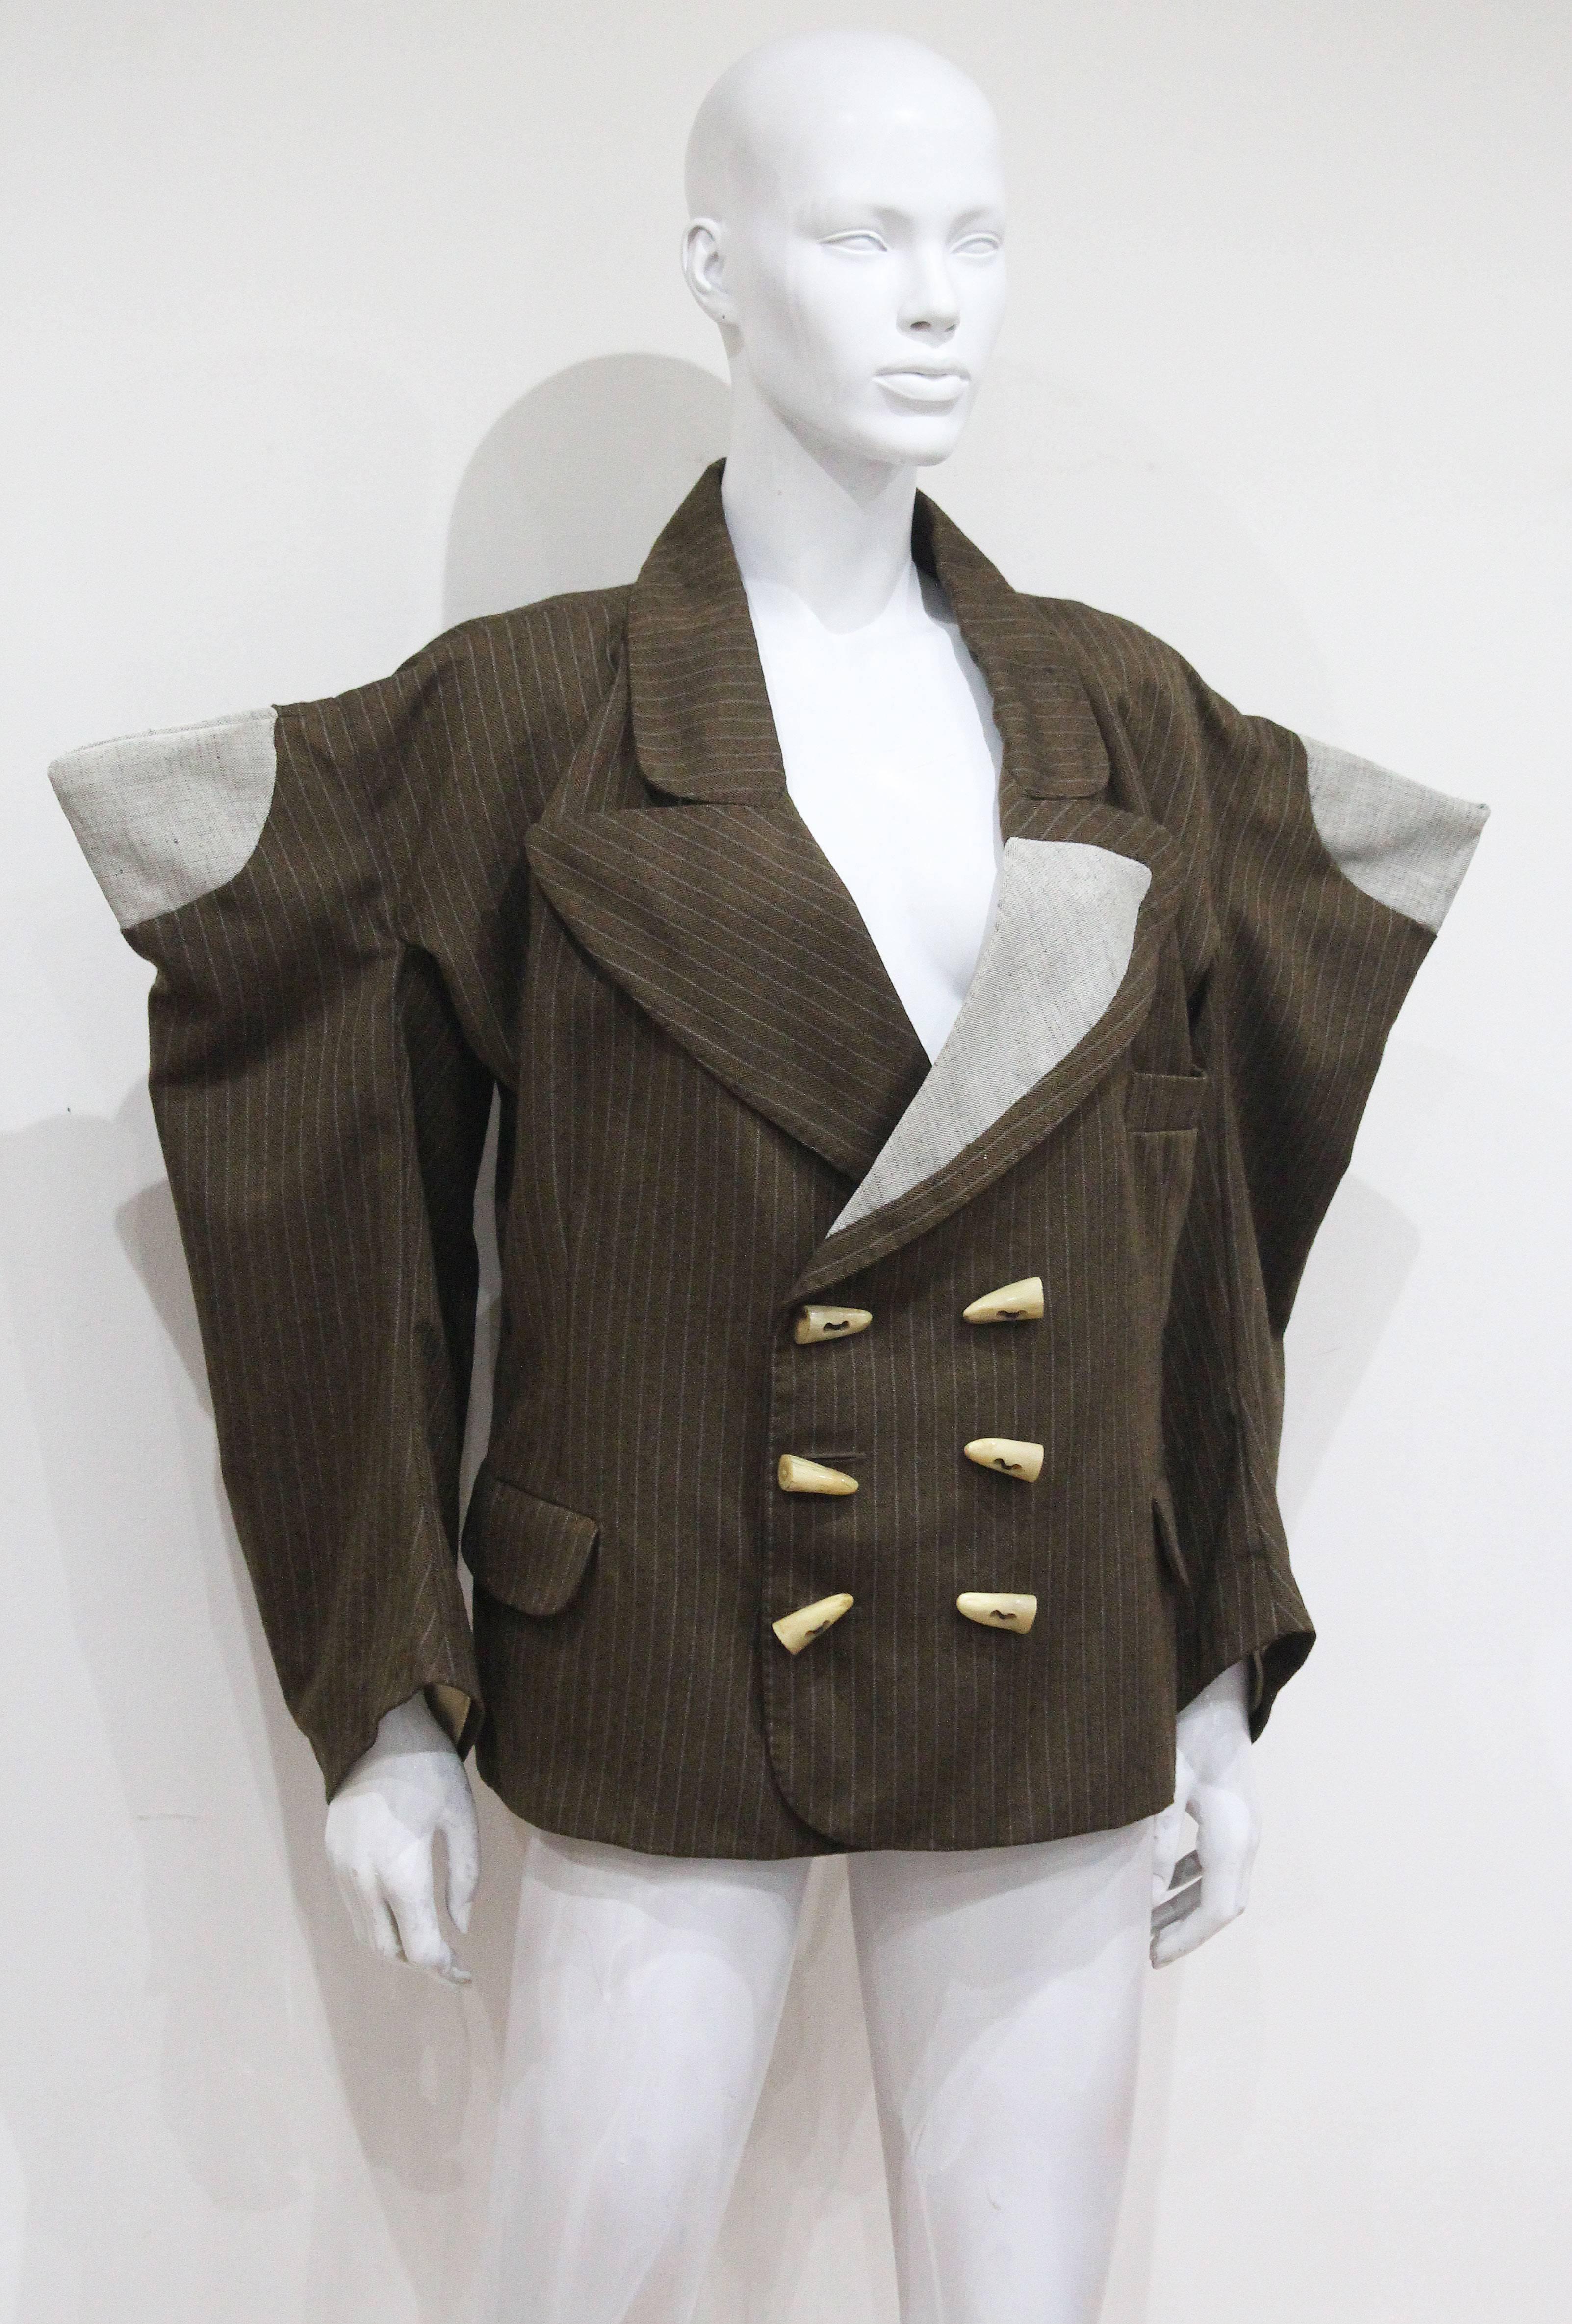 World's End by Vivienne Westwood and Malcolm Mclaren oversized striped brown herring-bone double breasted jacket with angular collar, large celluloid antler style buttons, massive angular shoulders inset with grey cotton roundels. From the 'Witches'